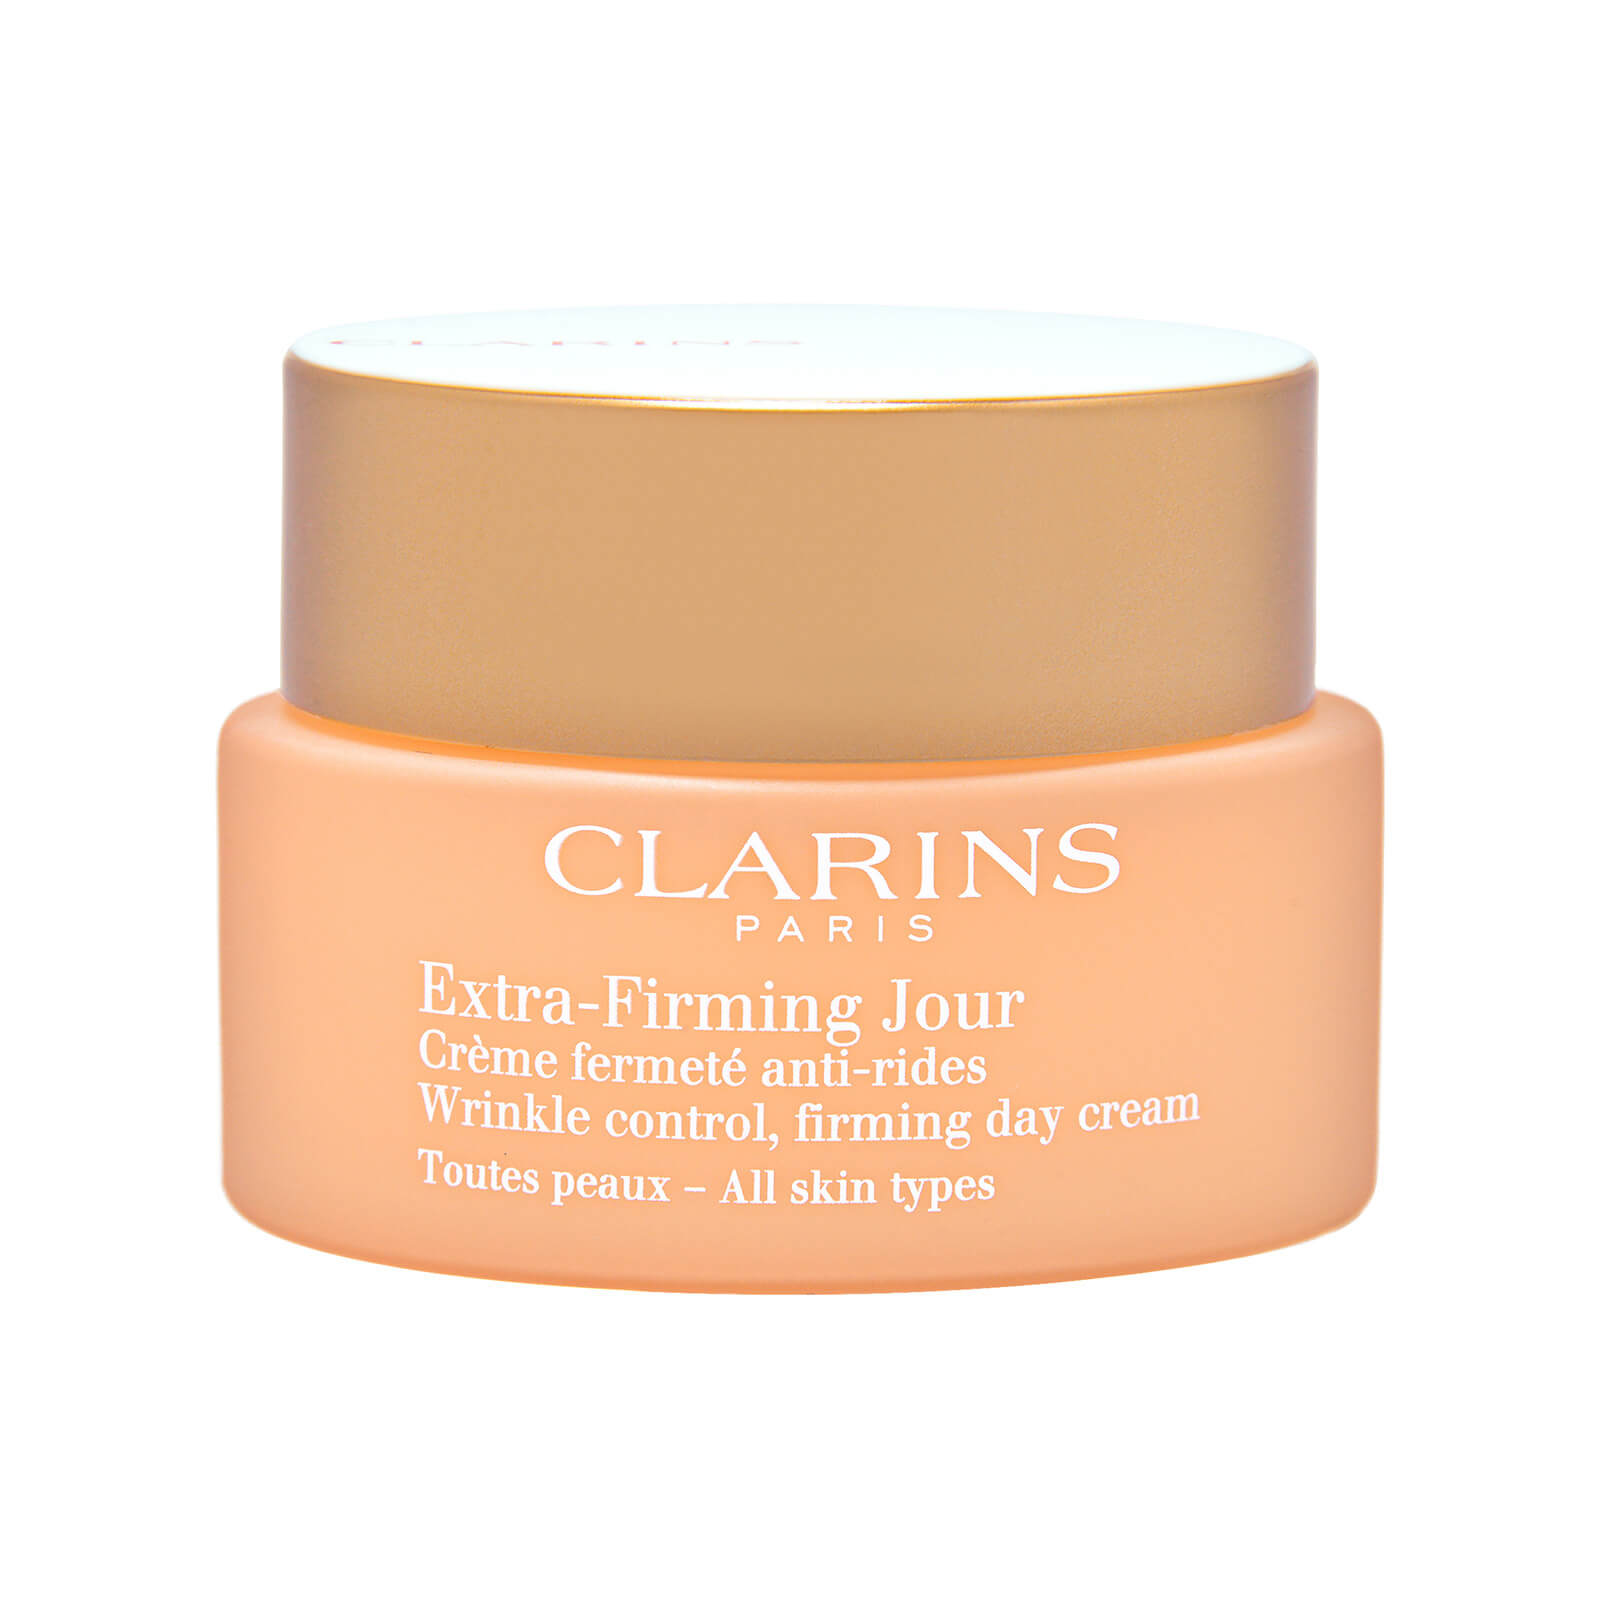 Extra-Firming Jour Wrinkle Control, Firming Day Cream (All Skin Types)